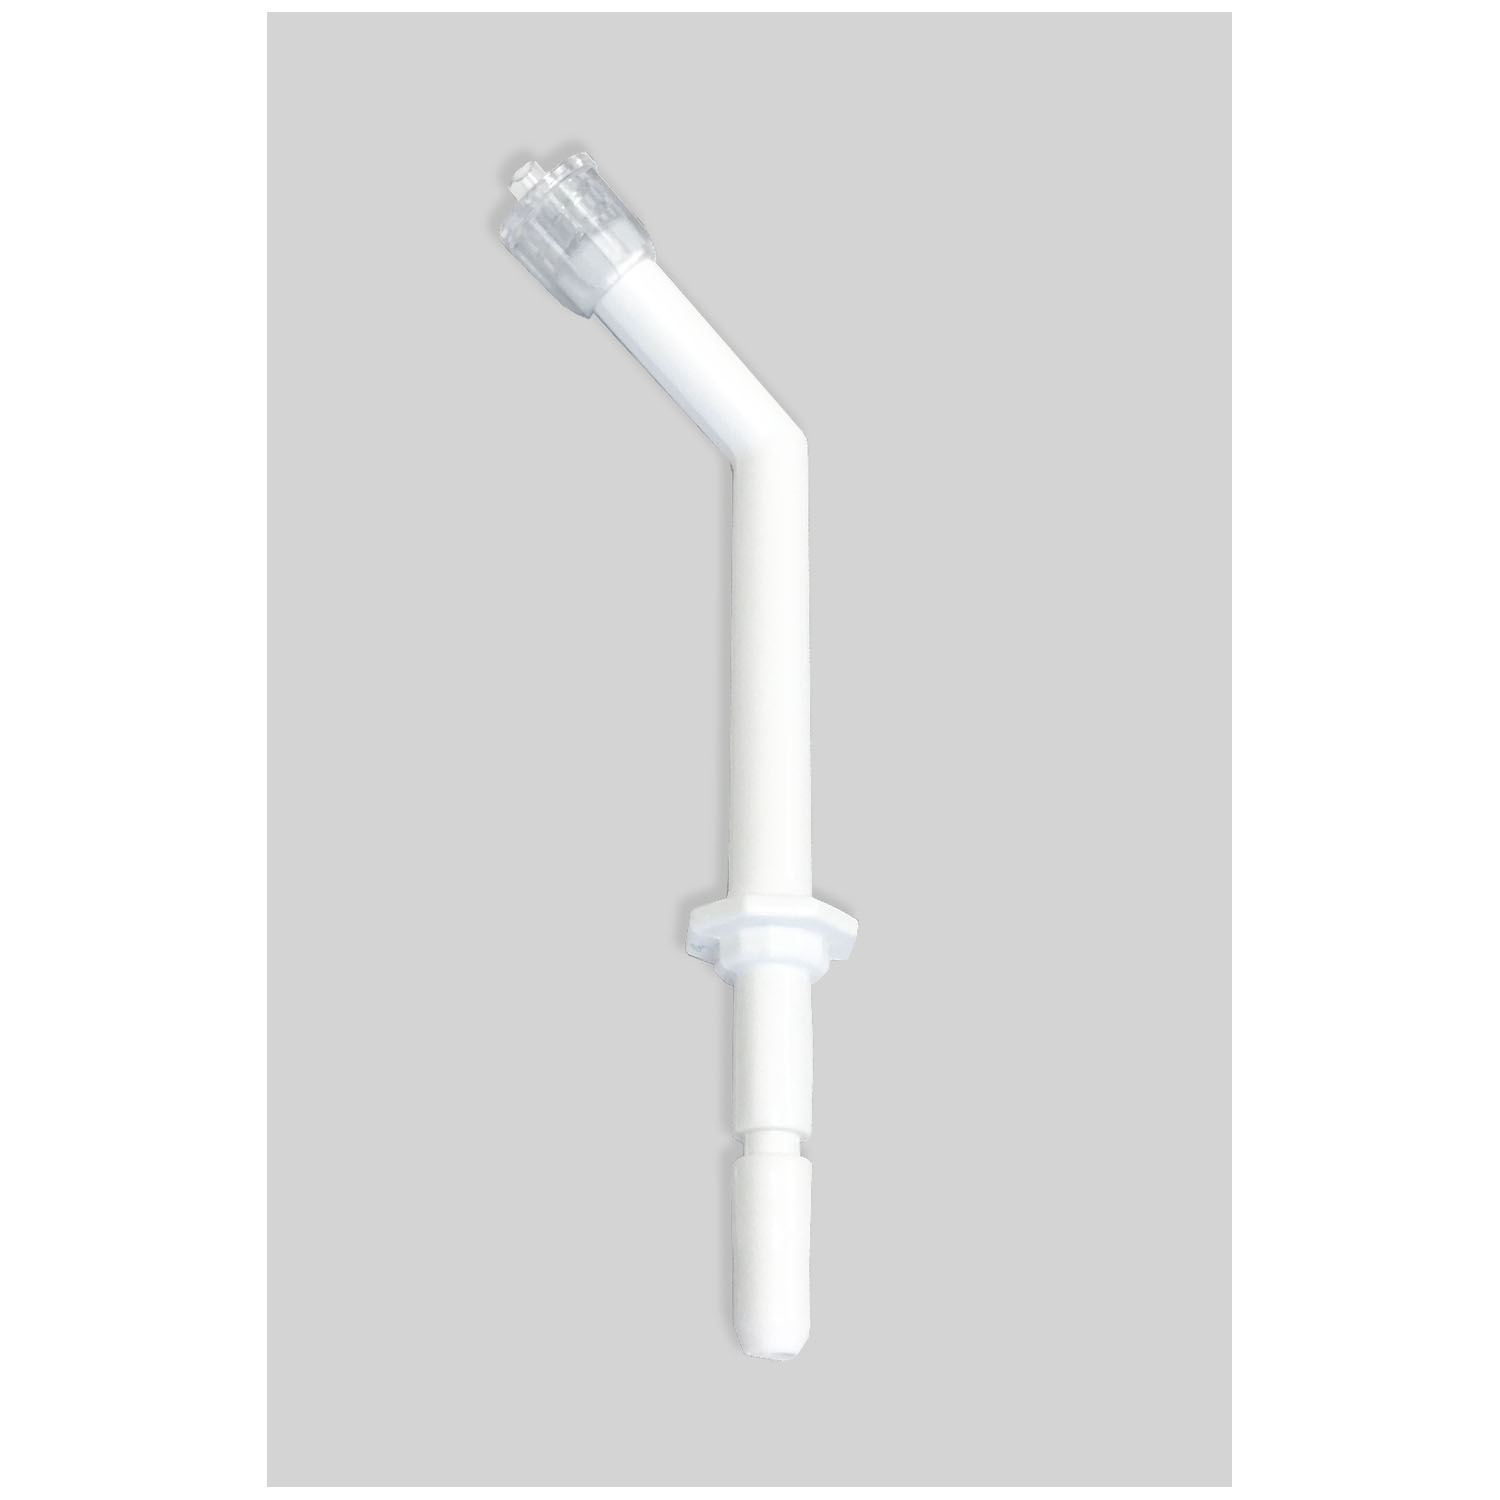 BIONIX EAR IRRIGATION ACCESSORIES AND SUPPLIES : 7215 BG $9.38 Stocked